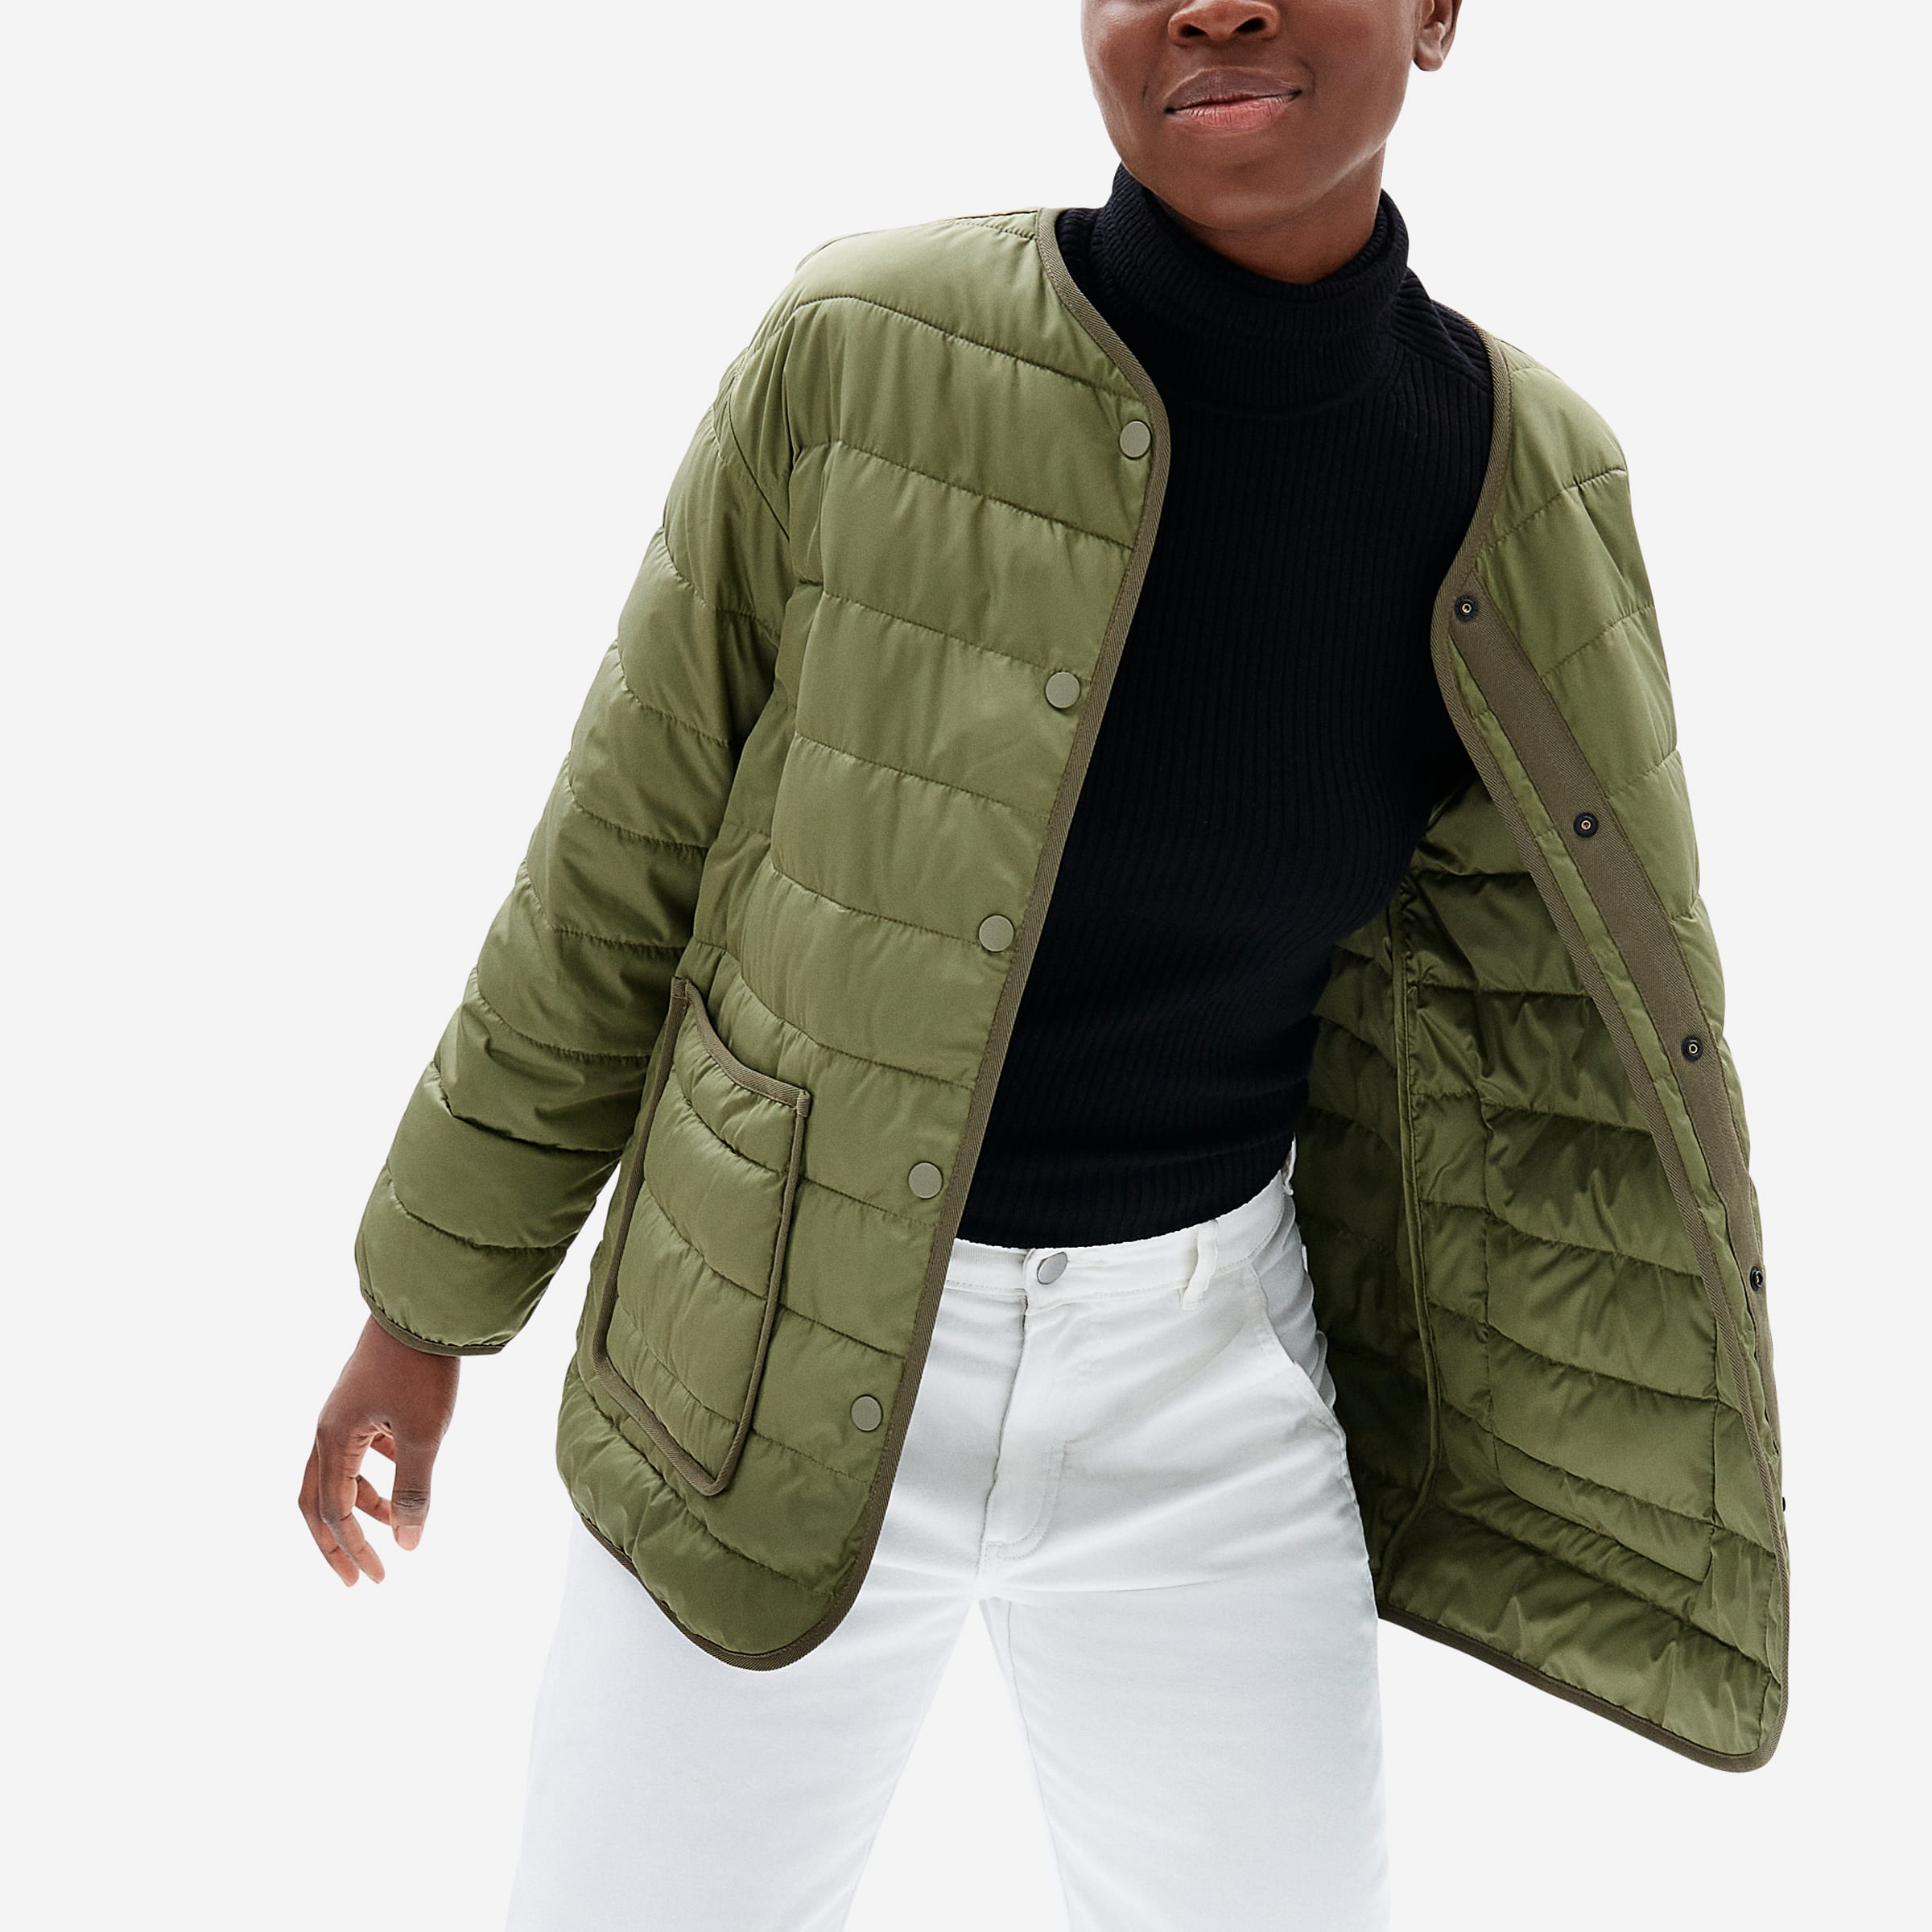 Right Jackets Layer Up Cooler Weather,